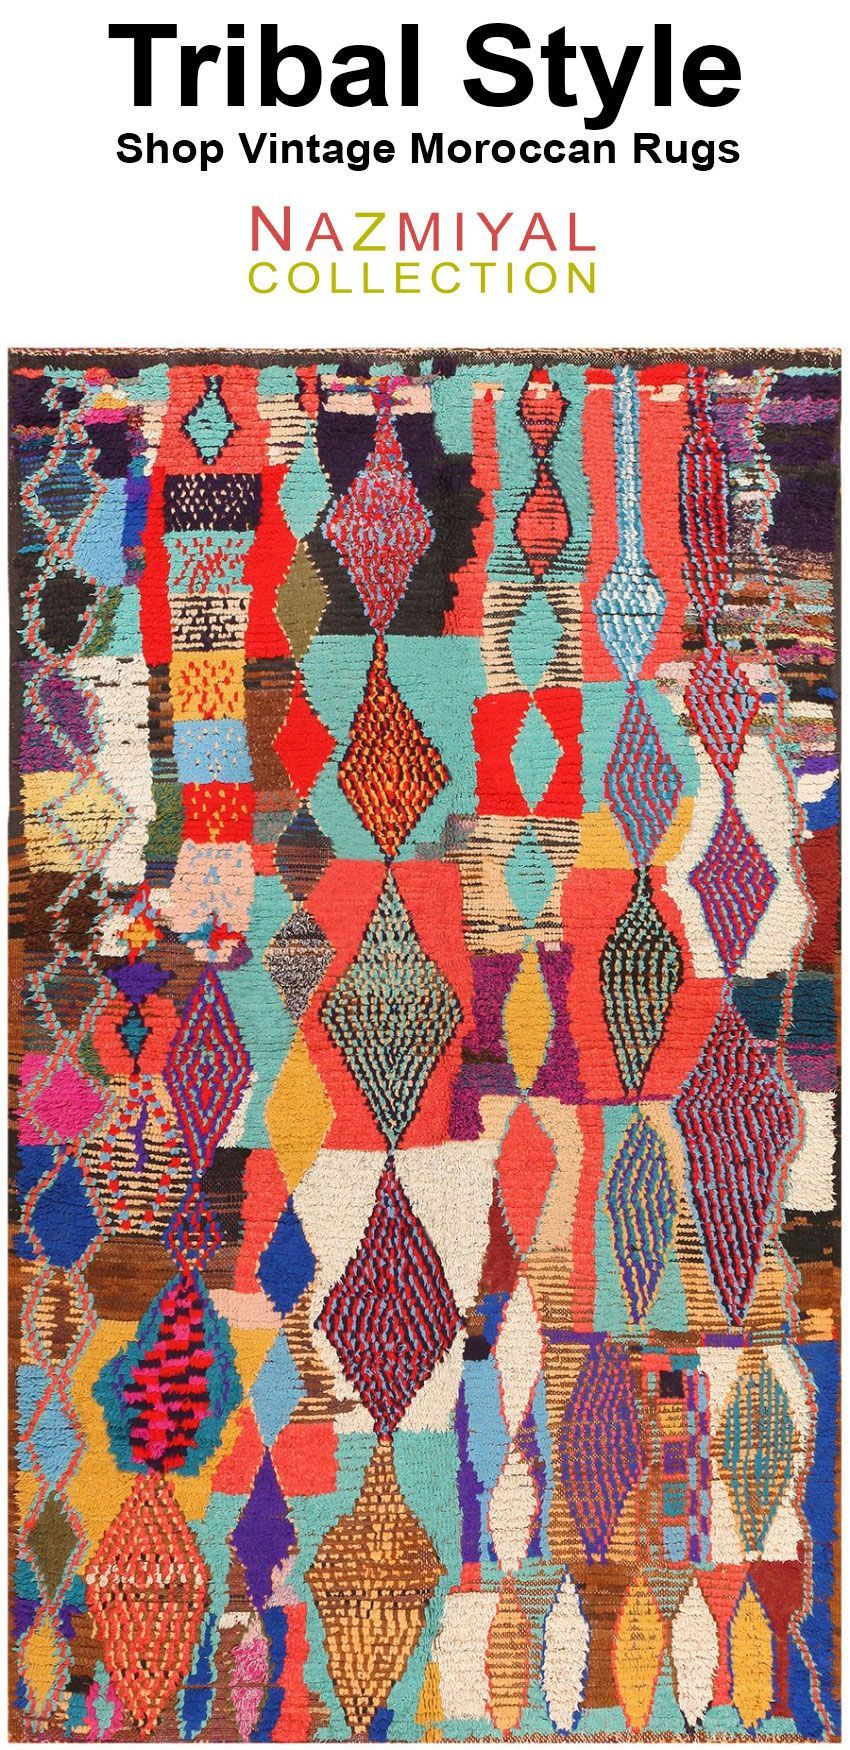 Moroccan Rugs Archives | Vintage Moroccan Rugs, Rugs, Tribal Home Decor Regarding Moroccan Rugs (View 15 of 15)